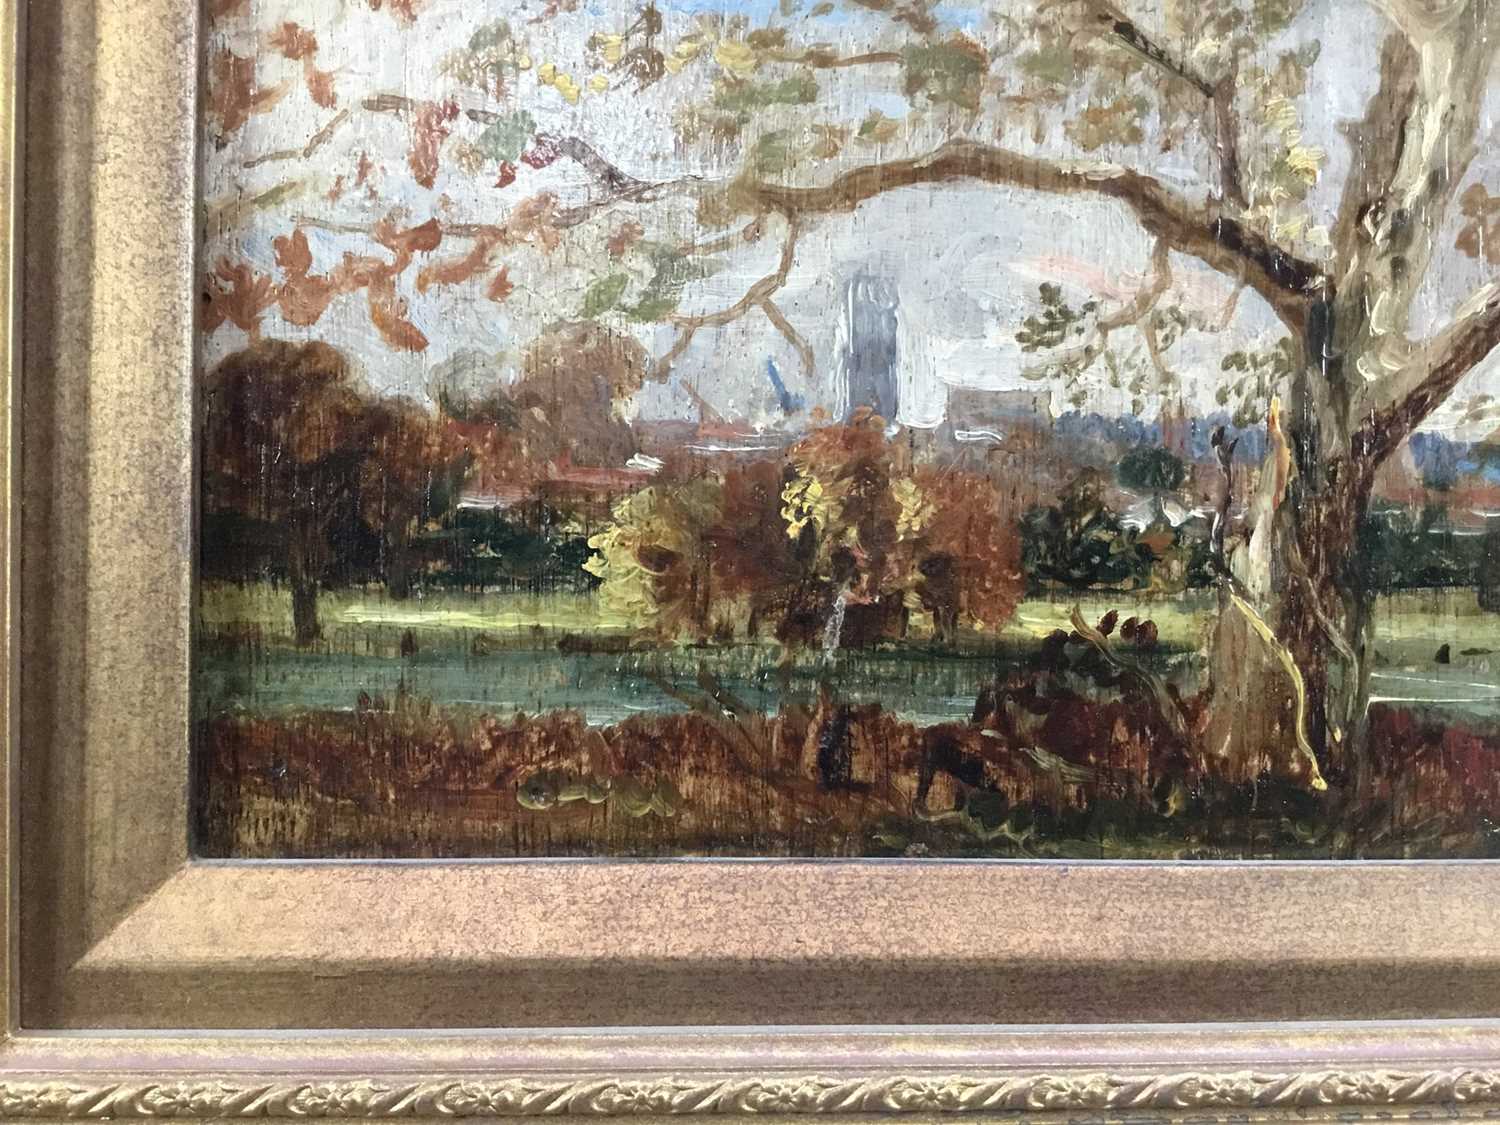 Thomas Churchyard (1798-1865) oil on panel - View through trees, inscribed 'Anna' verso, 13.5cm x 28 - Image 3 of 8